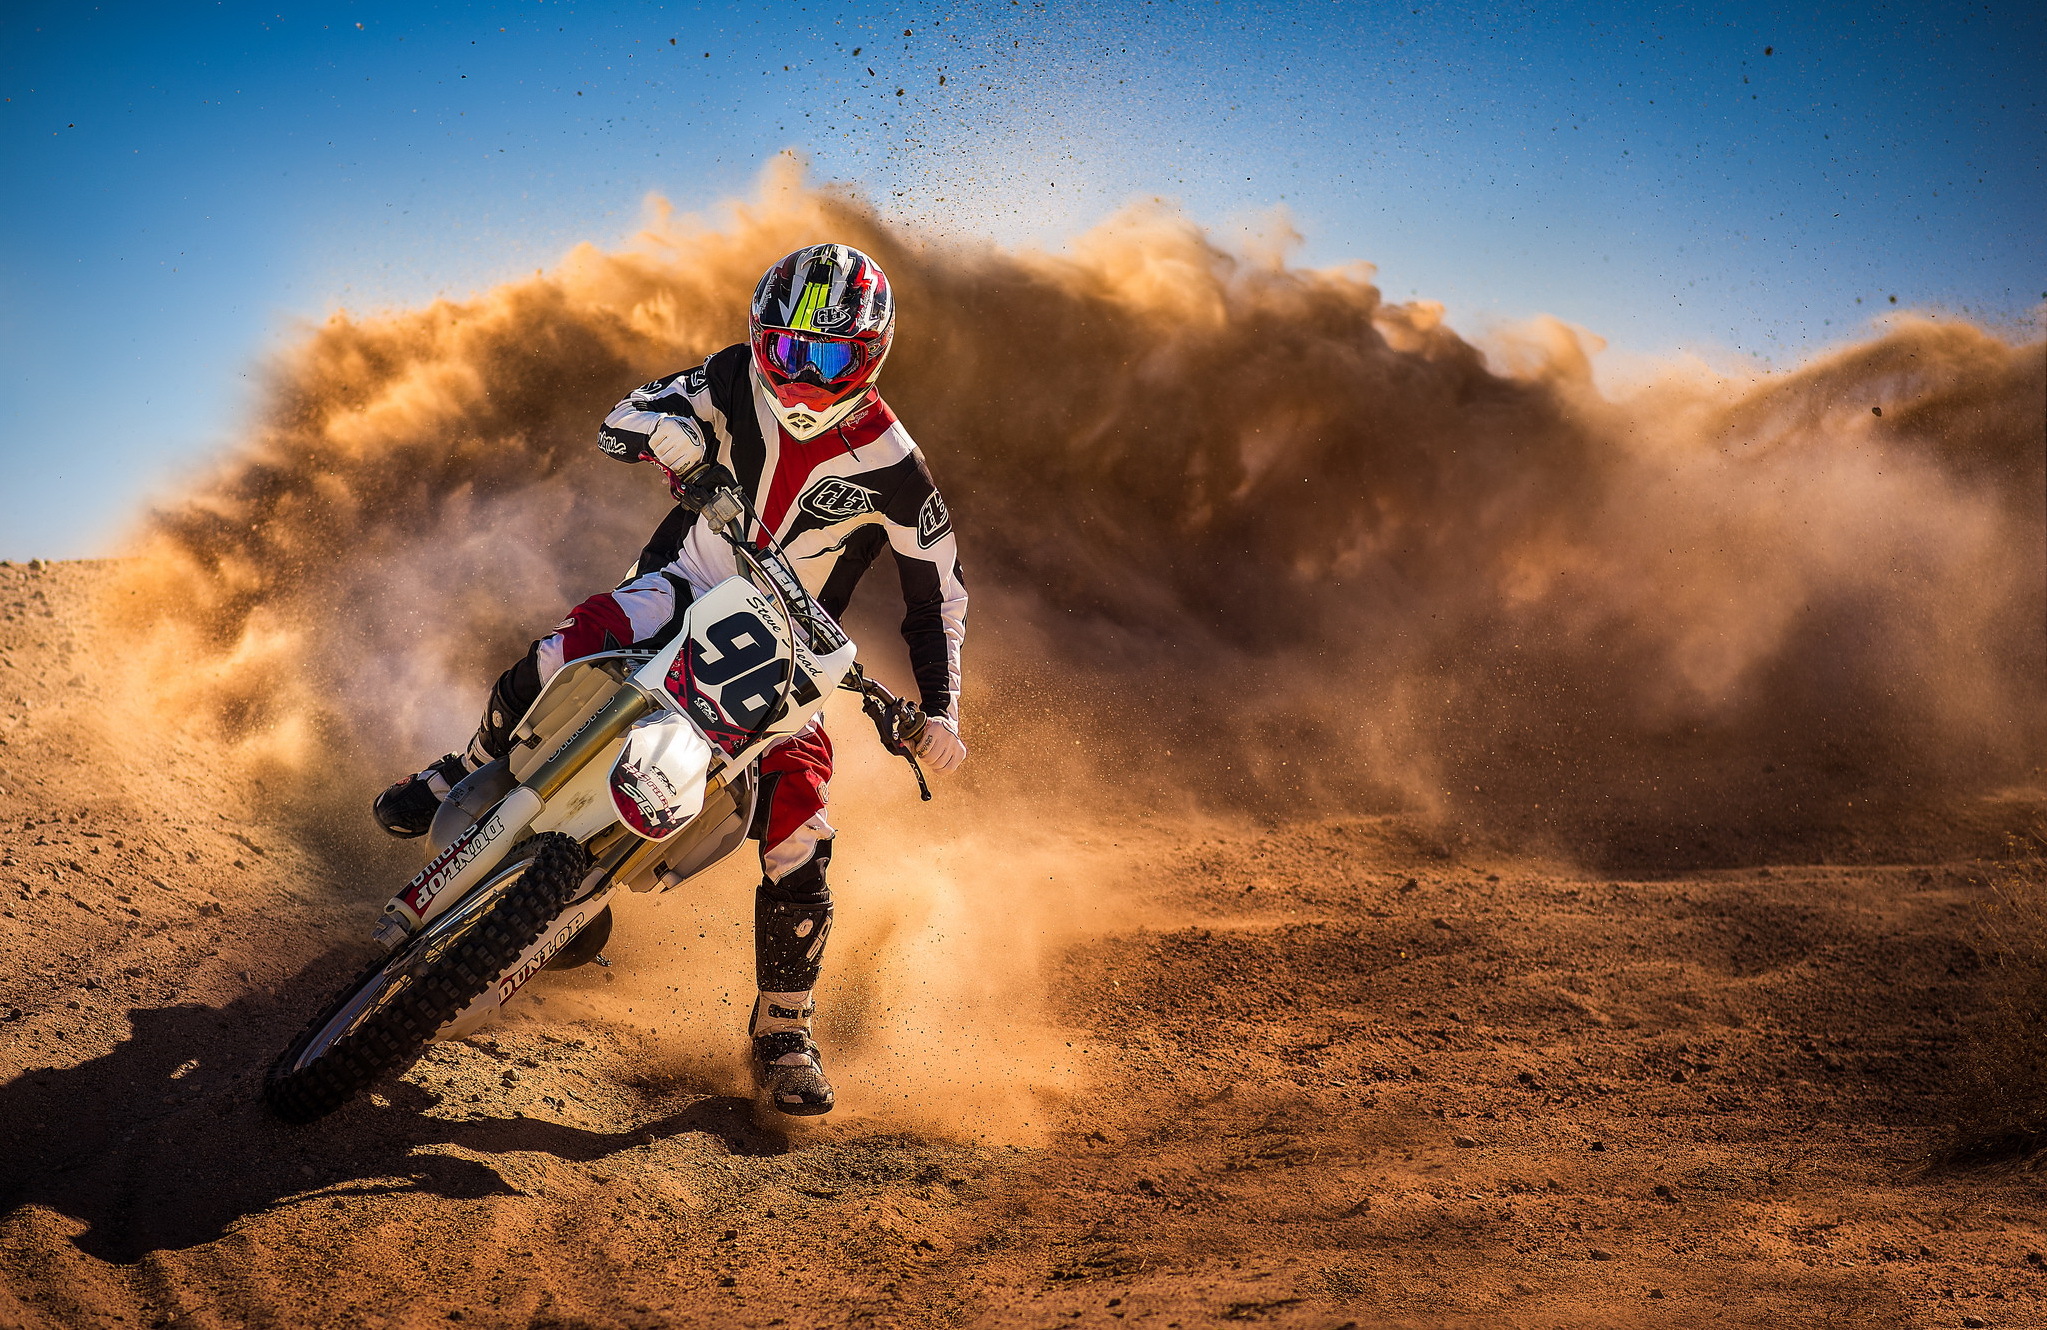 dust, motorcycles, race, sports, motorcyclist, motorcycle